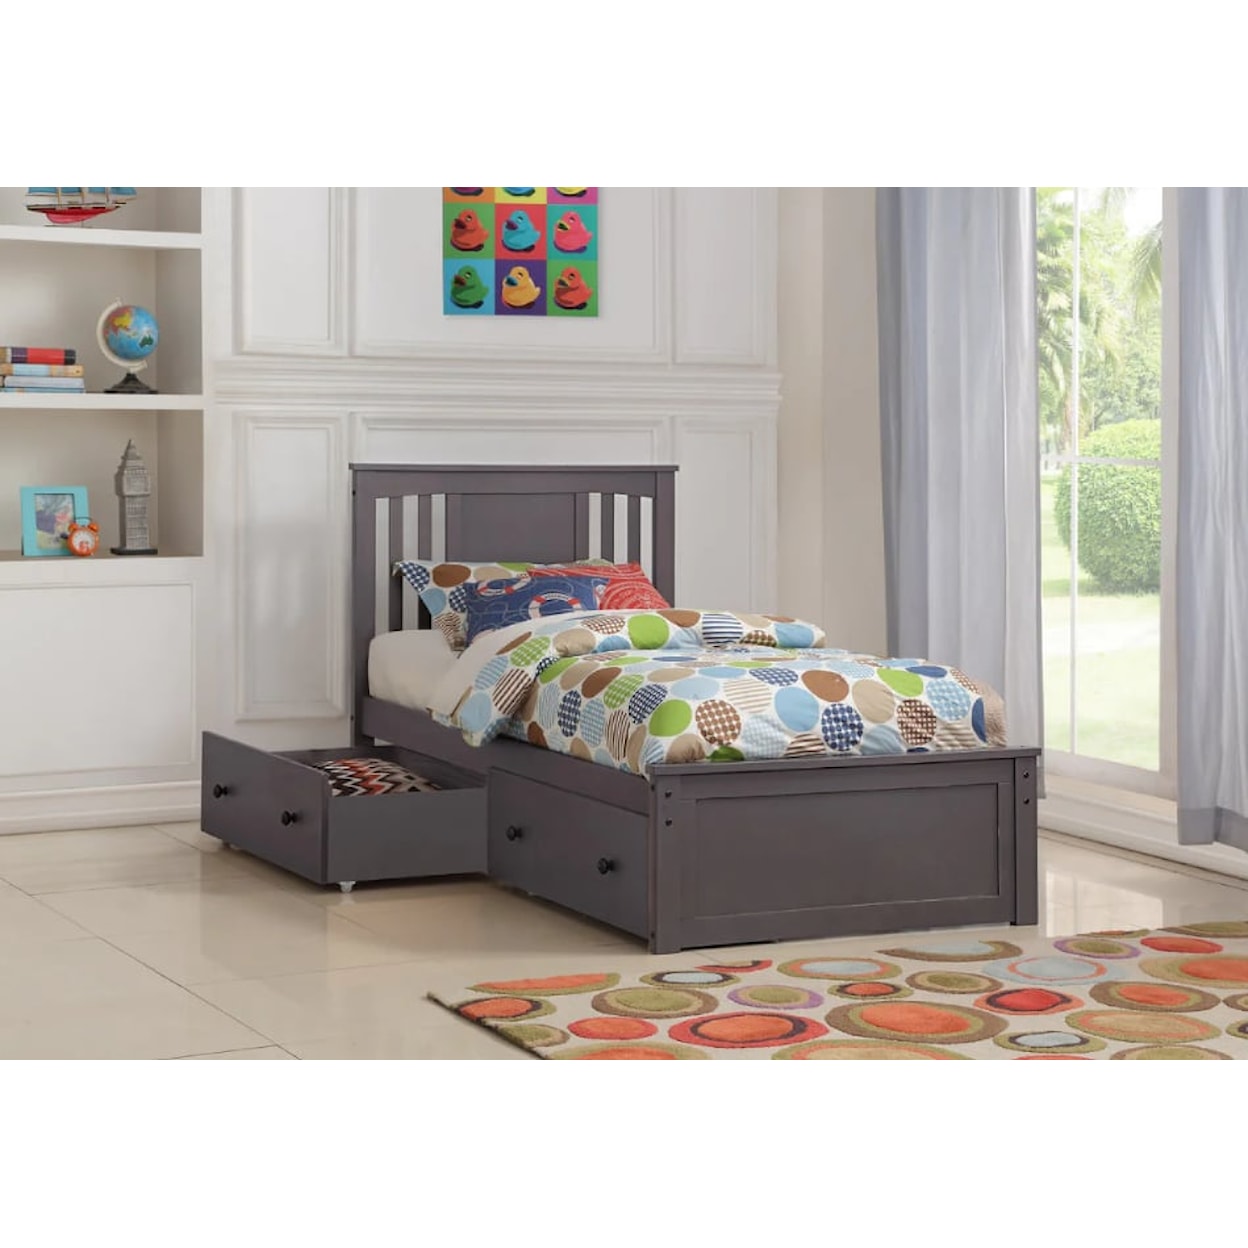 Donco Trading Co Platform Beds PRINCETON GREY FULL BED WITH | STORAGE